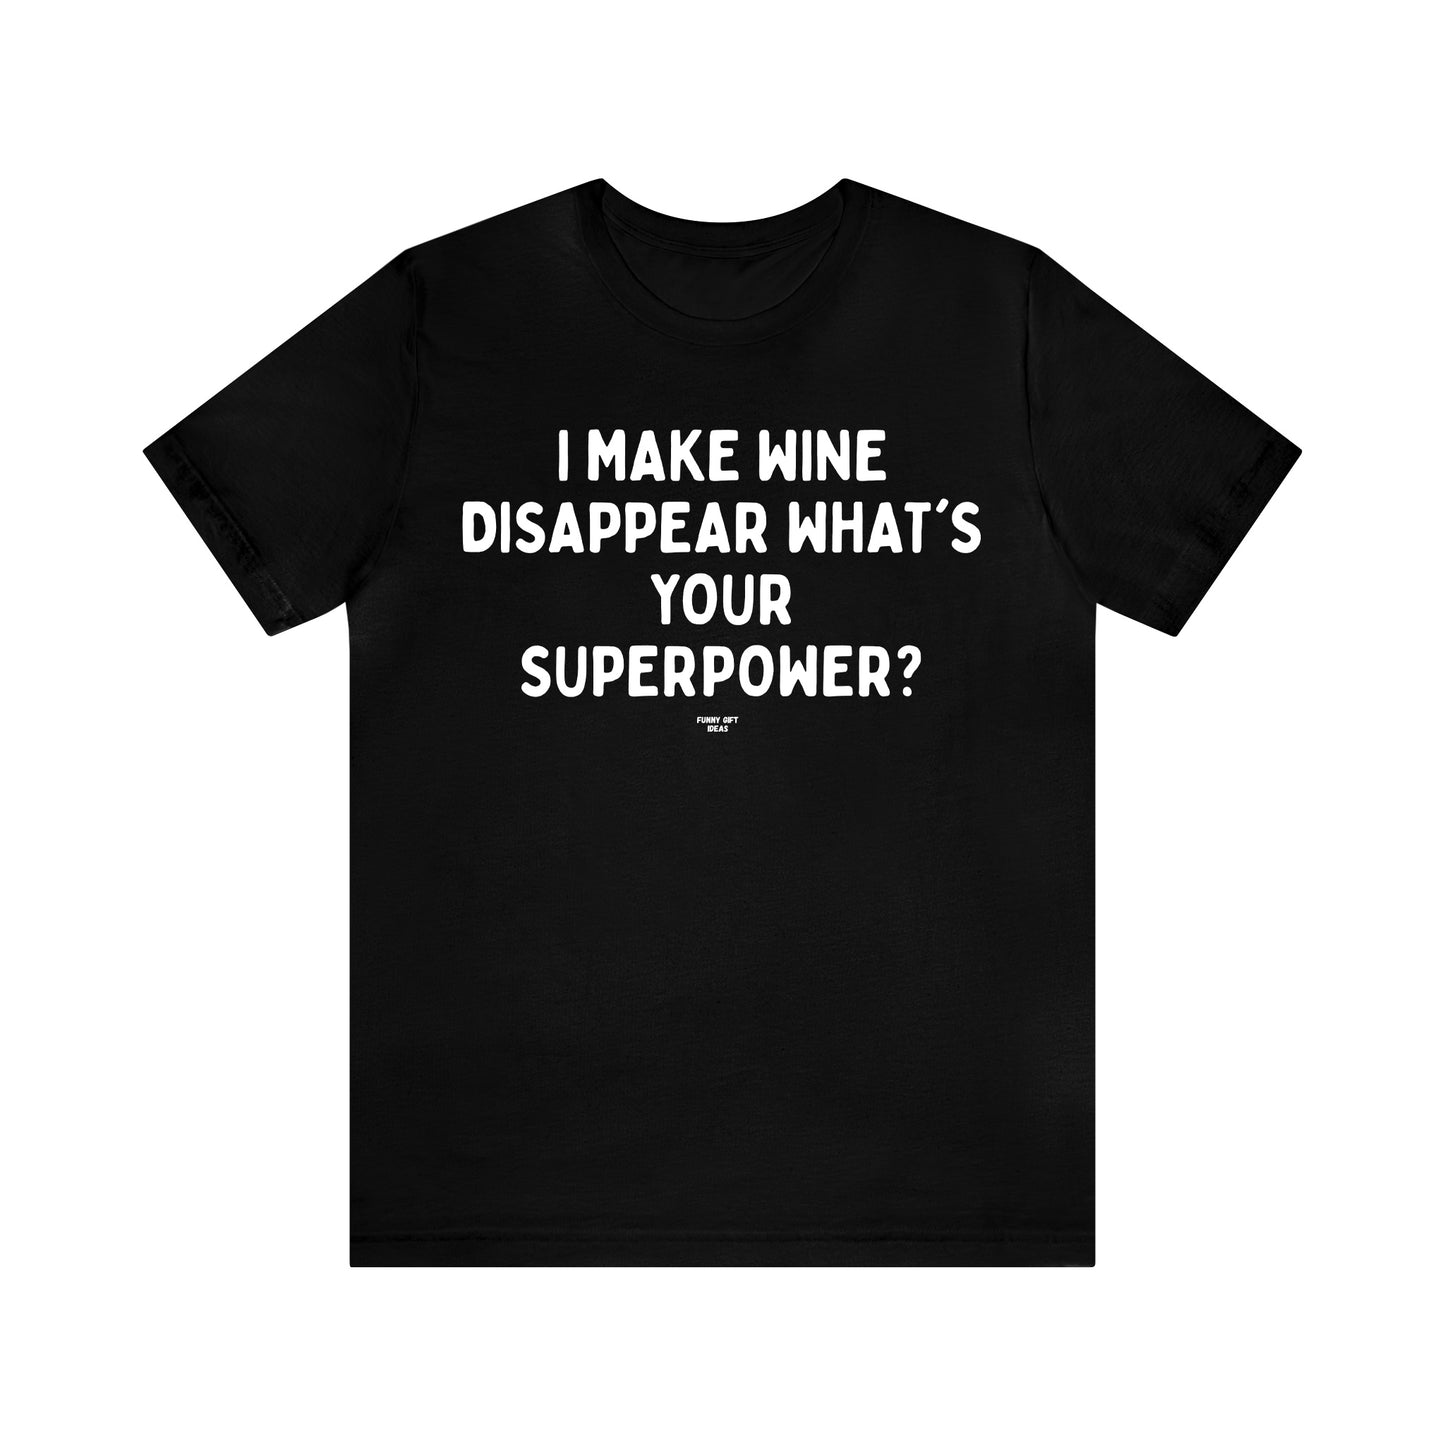 Mens T Shirts - I Make Wine Disappear What's Your Superpower? - Funny Men T Shirts